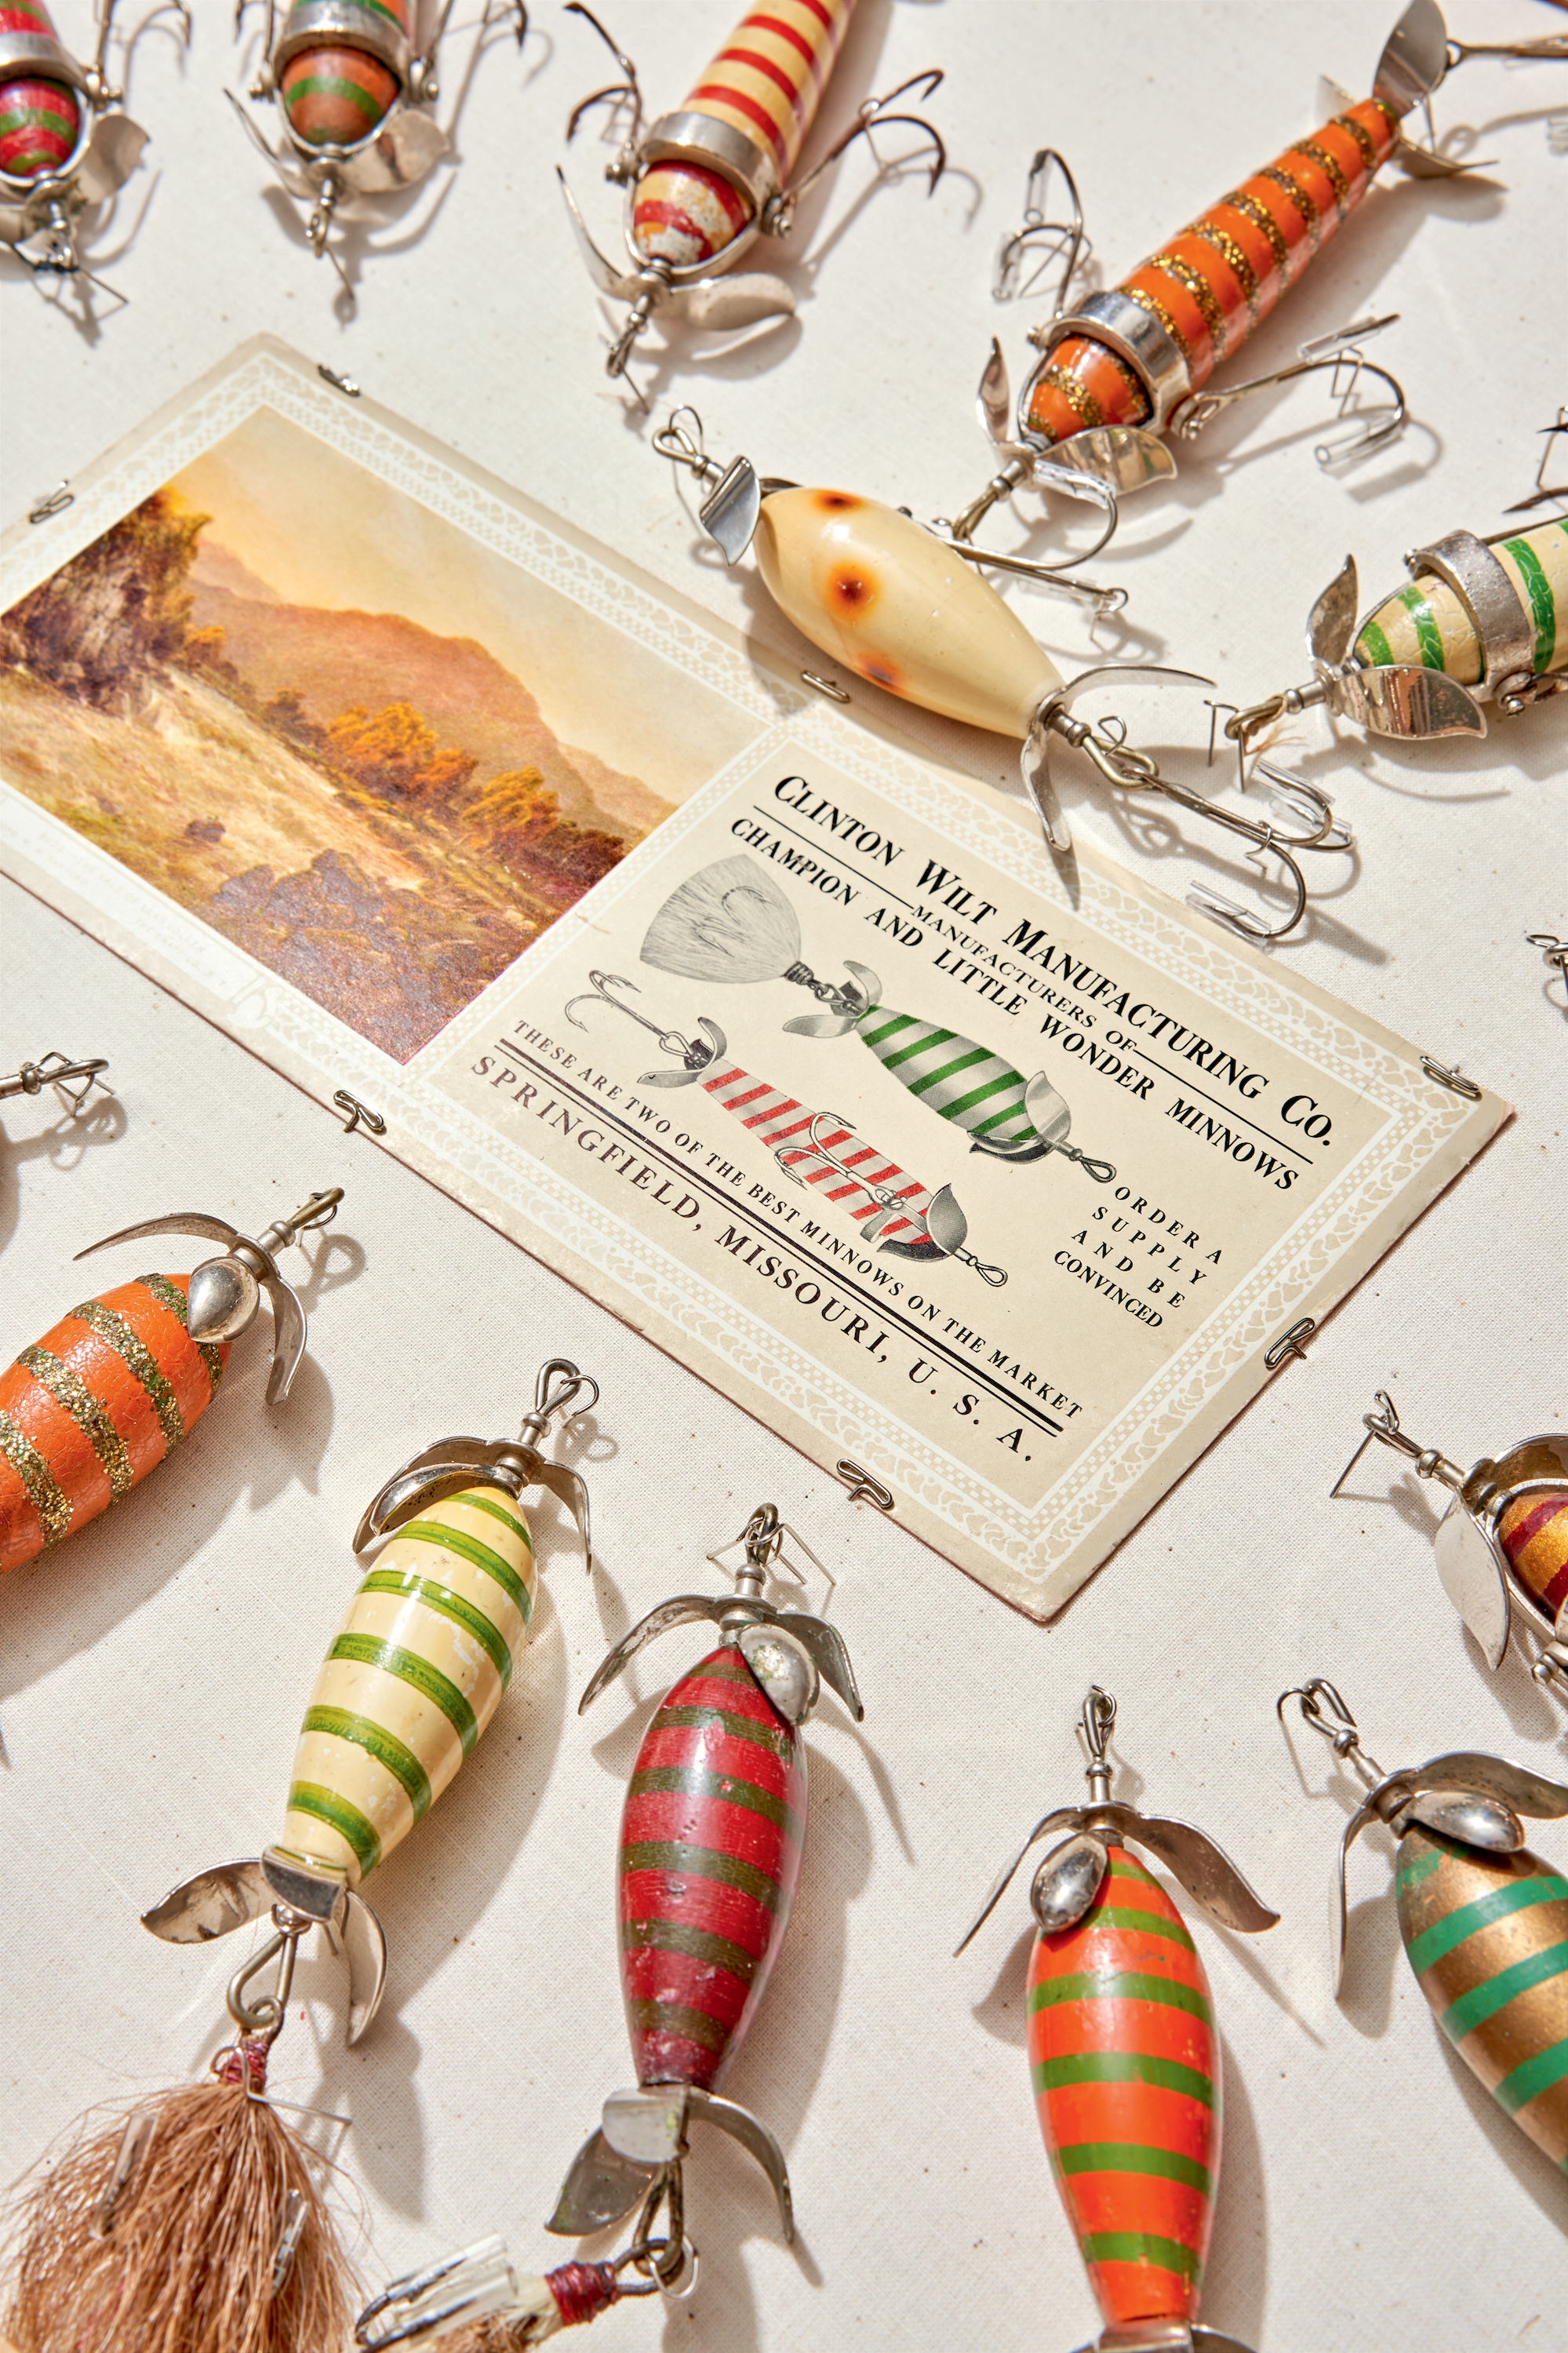 Antique Fishing Lures from the Early 1900s